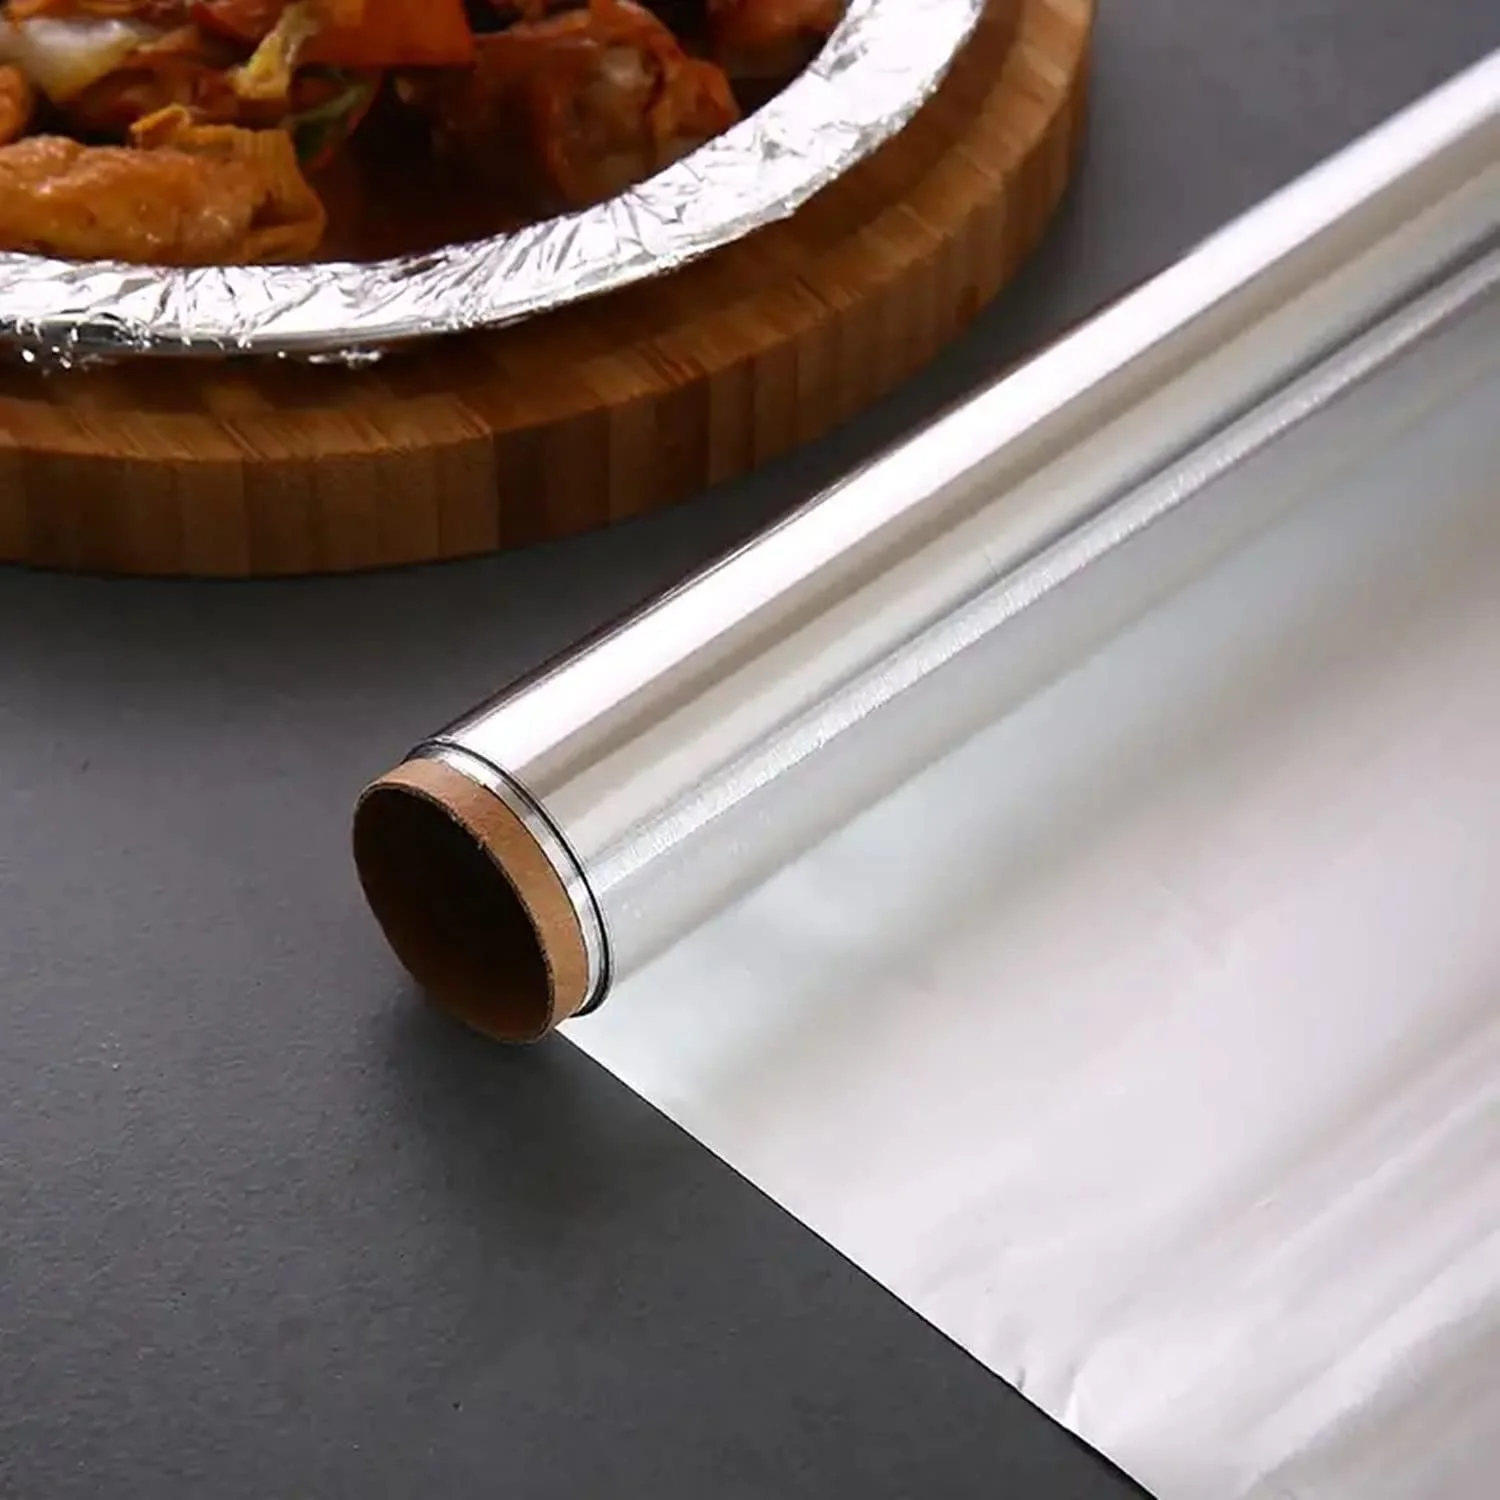 Black King FOOD GRADE ALUMINIUM FOIL PAPER FOR DAILY KITCHEN USE FOR  WRAPPING FOODS Aluminium Foil Price in India - Buy Black King FOOD GRADE  ALUMINIUM FOIL PAPER FOR DAILY KITCHEN USE